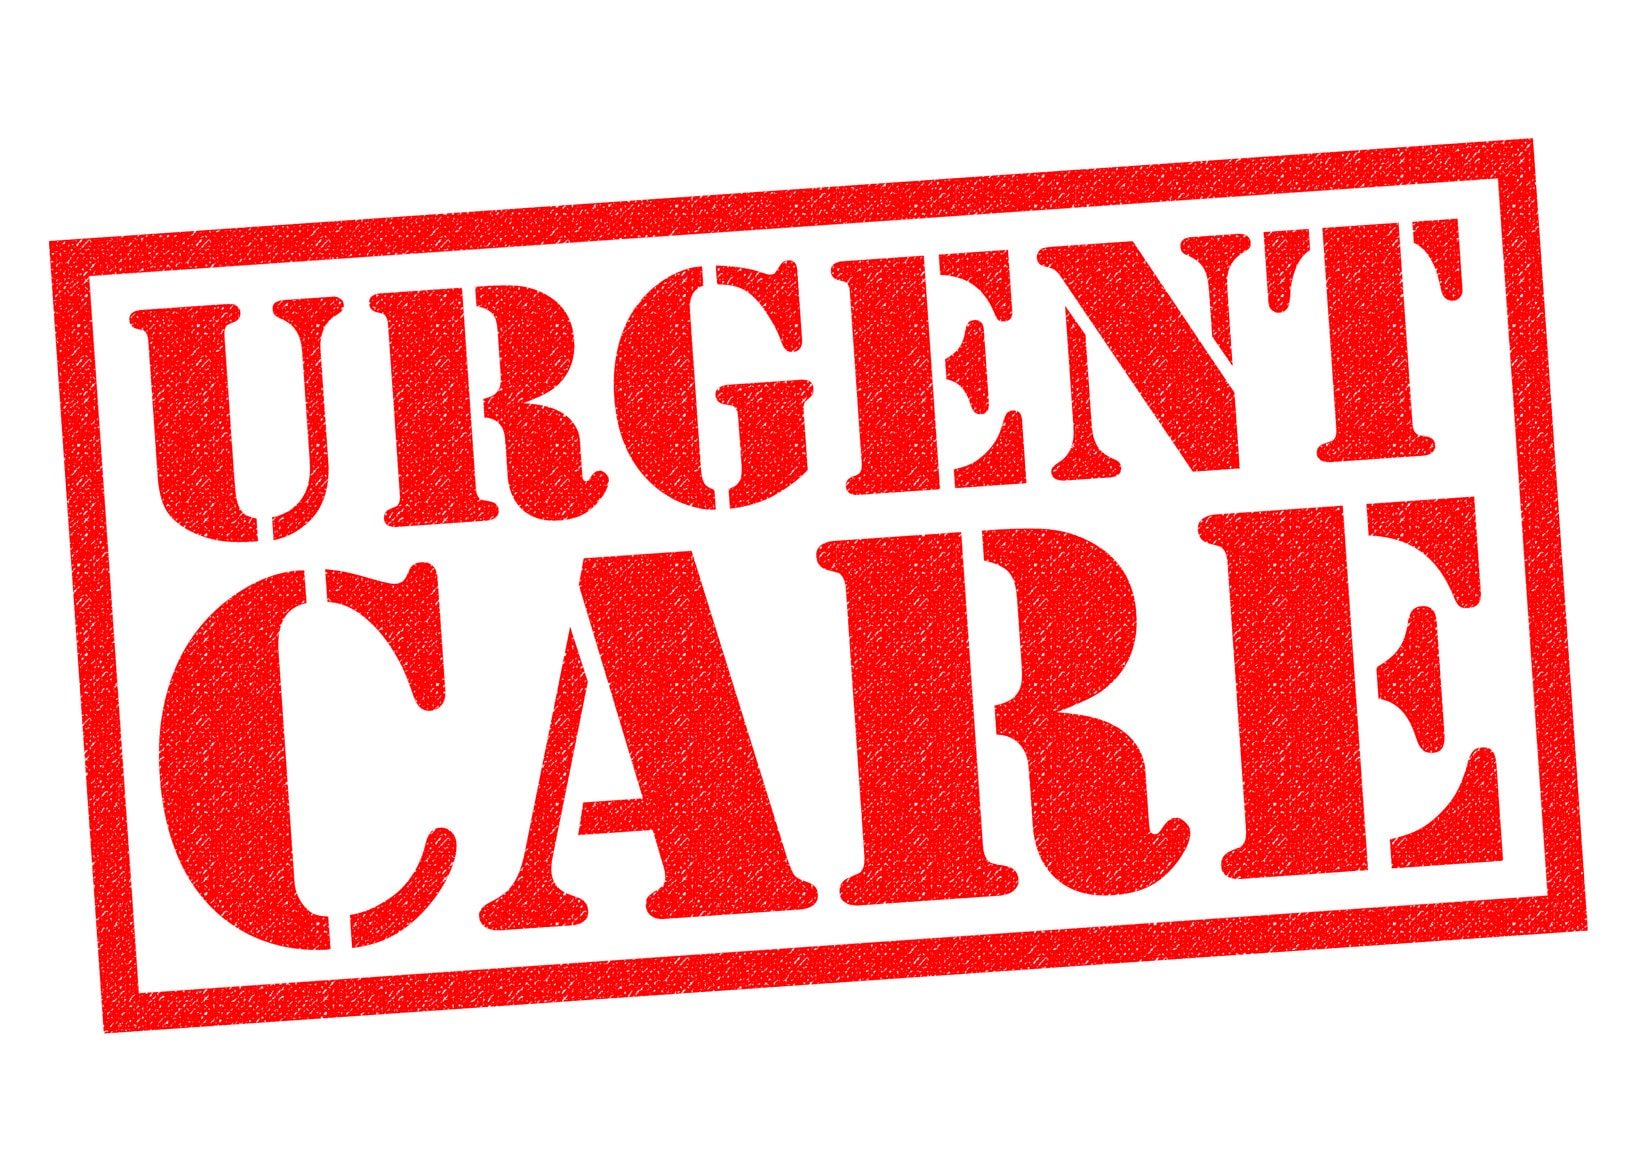 Update New Data Show Most Urgent Care Centers Are Open and Testing for